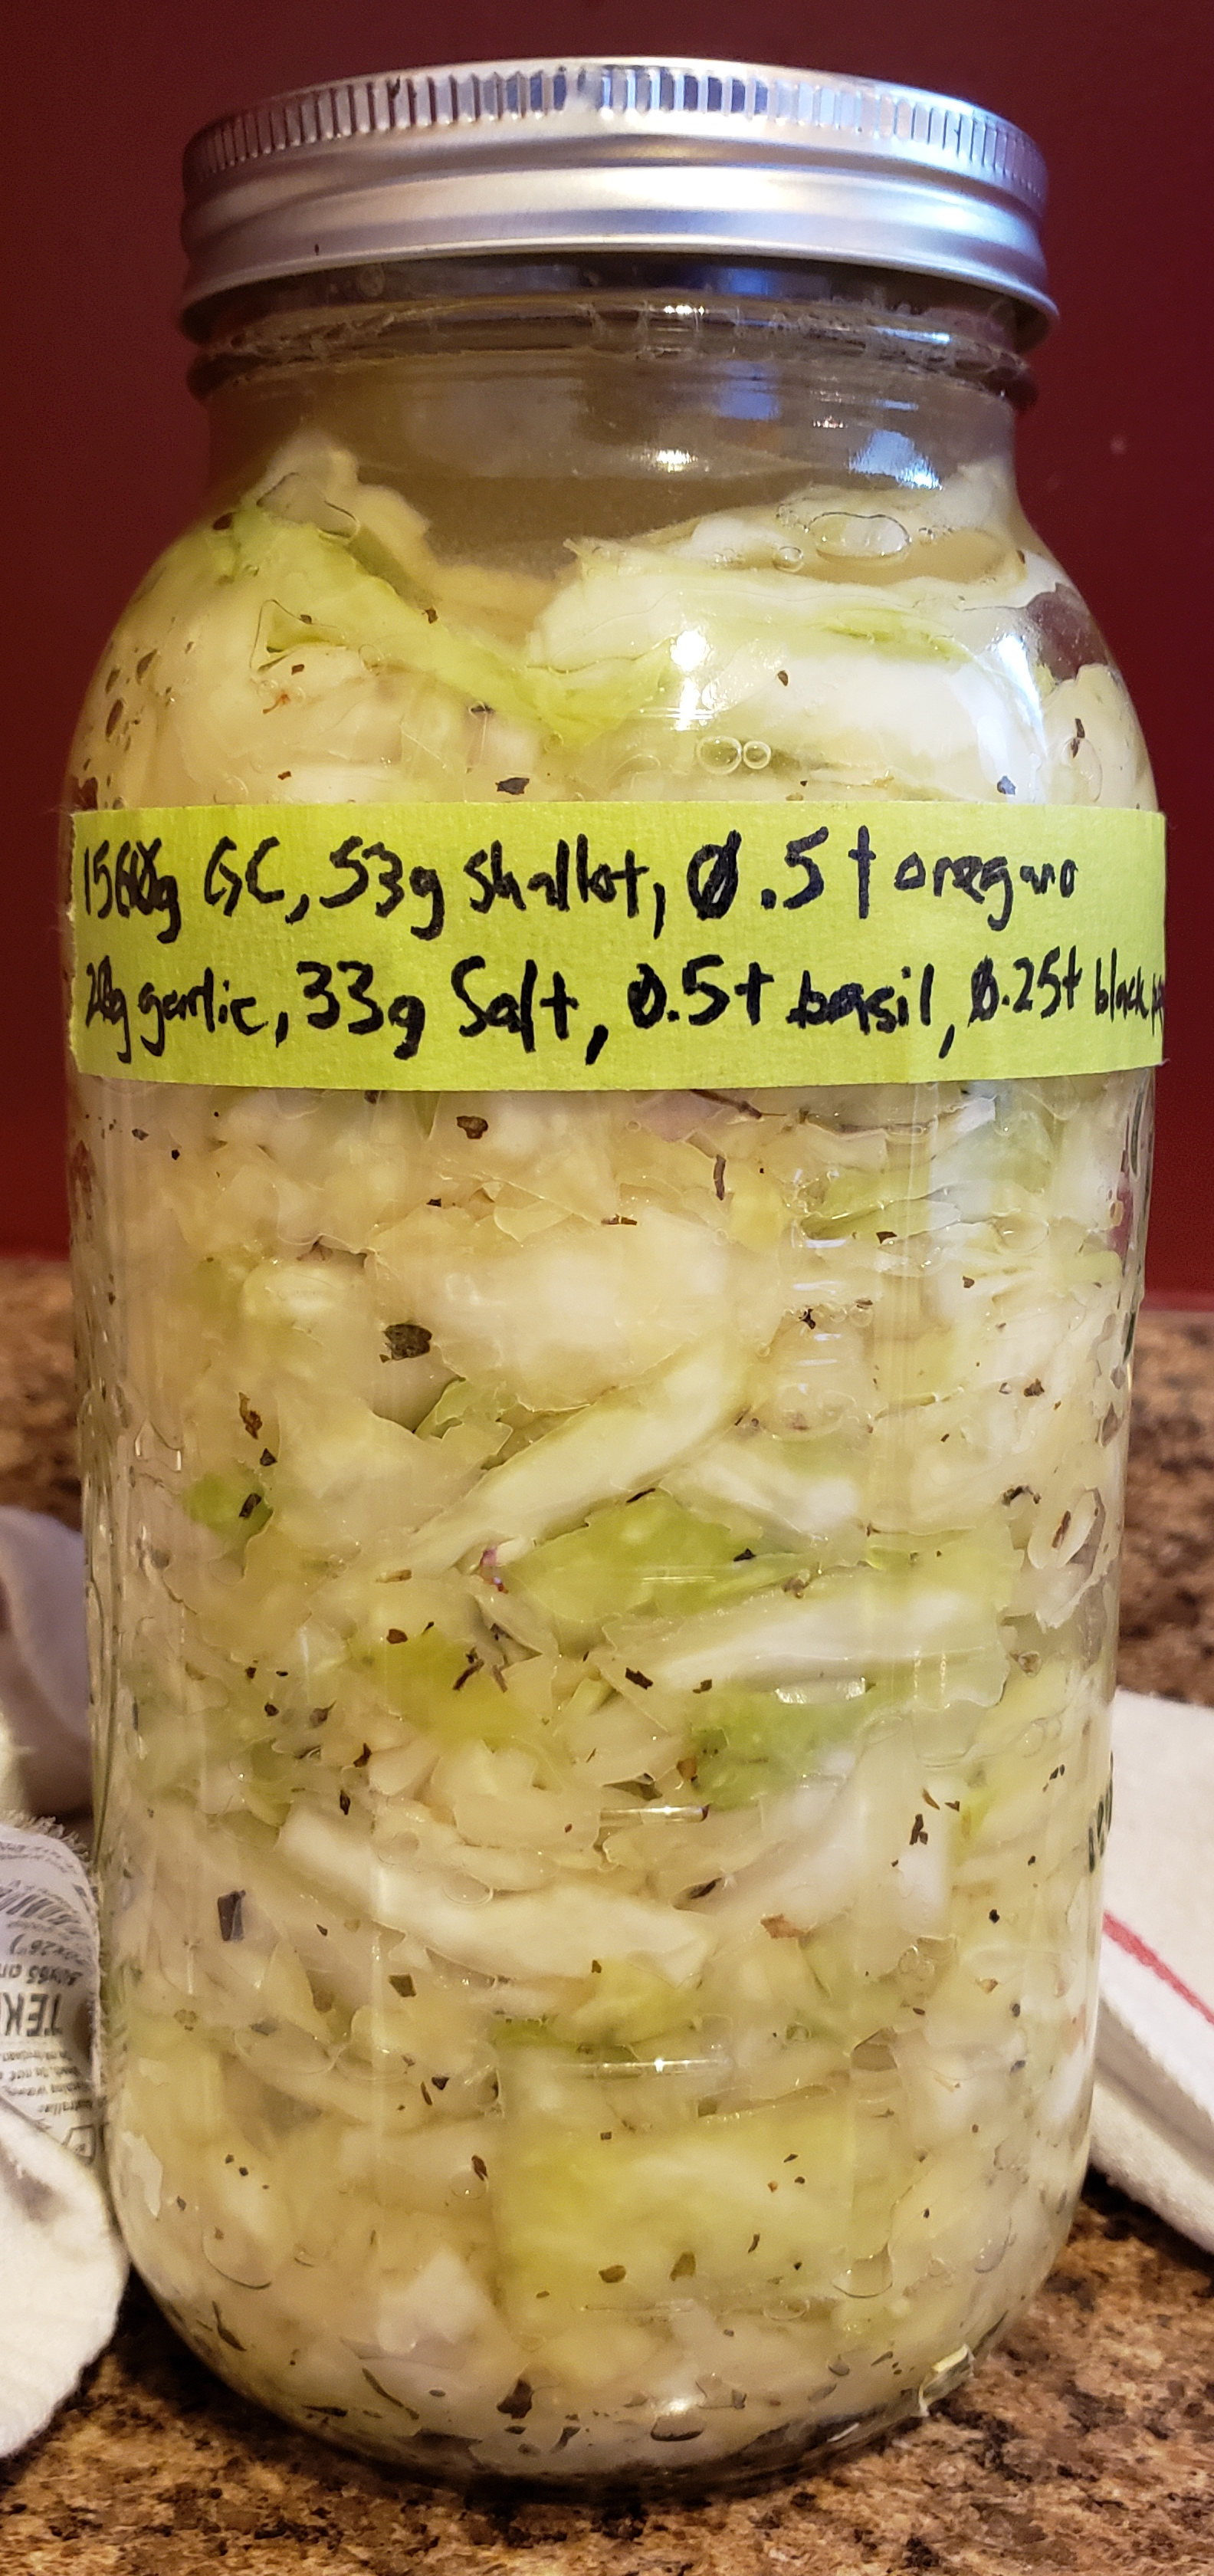 The ferment from the earlier post is becoming more dull in color. The liquid level has increased a lot since the first photo.